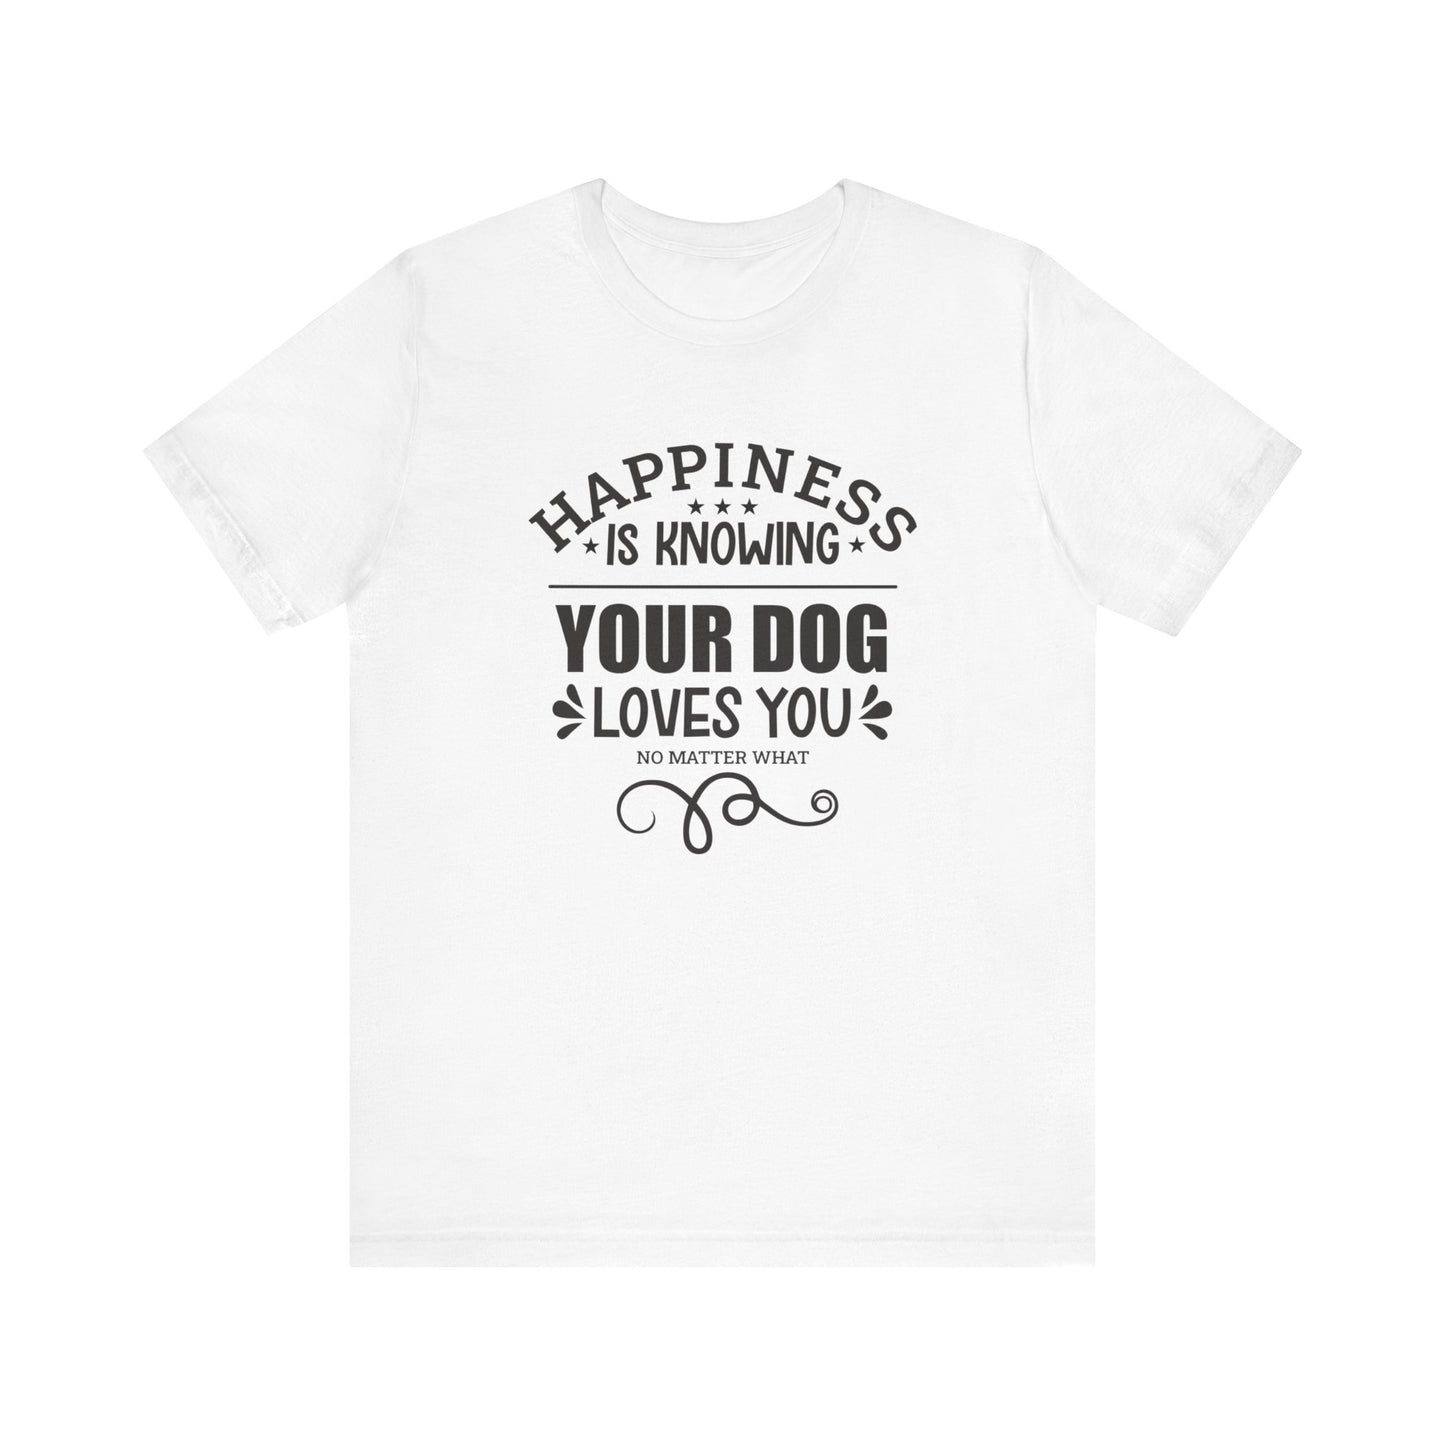 On a white canvas, a white unisex t-shirt features the slogan 'Happiness is knowing your dog loves you no matter what,' by Dogs Pure Love.